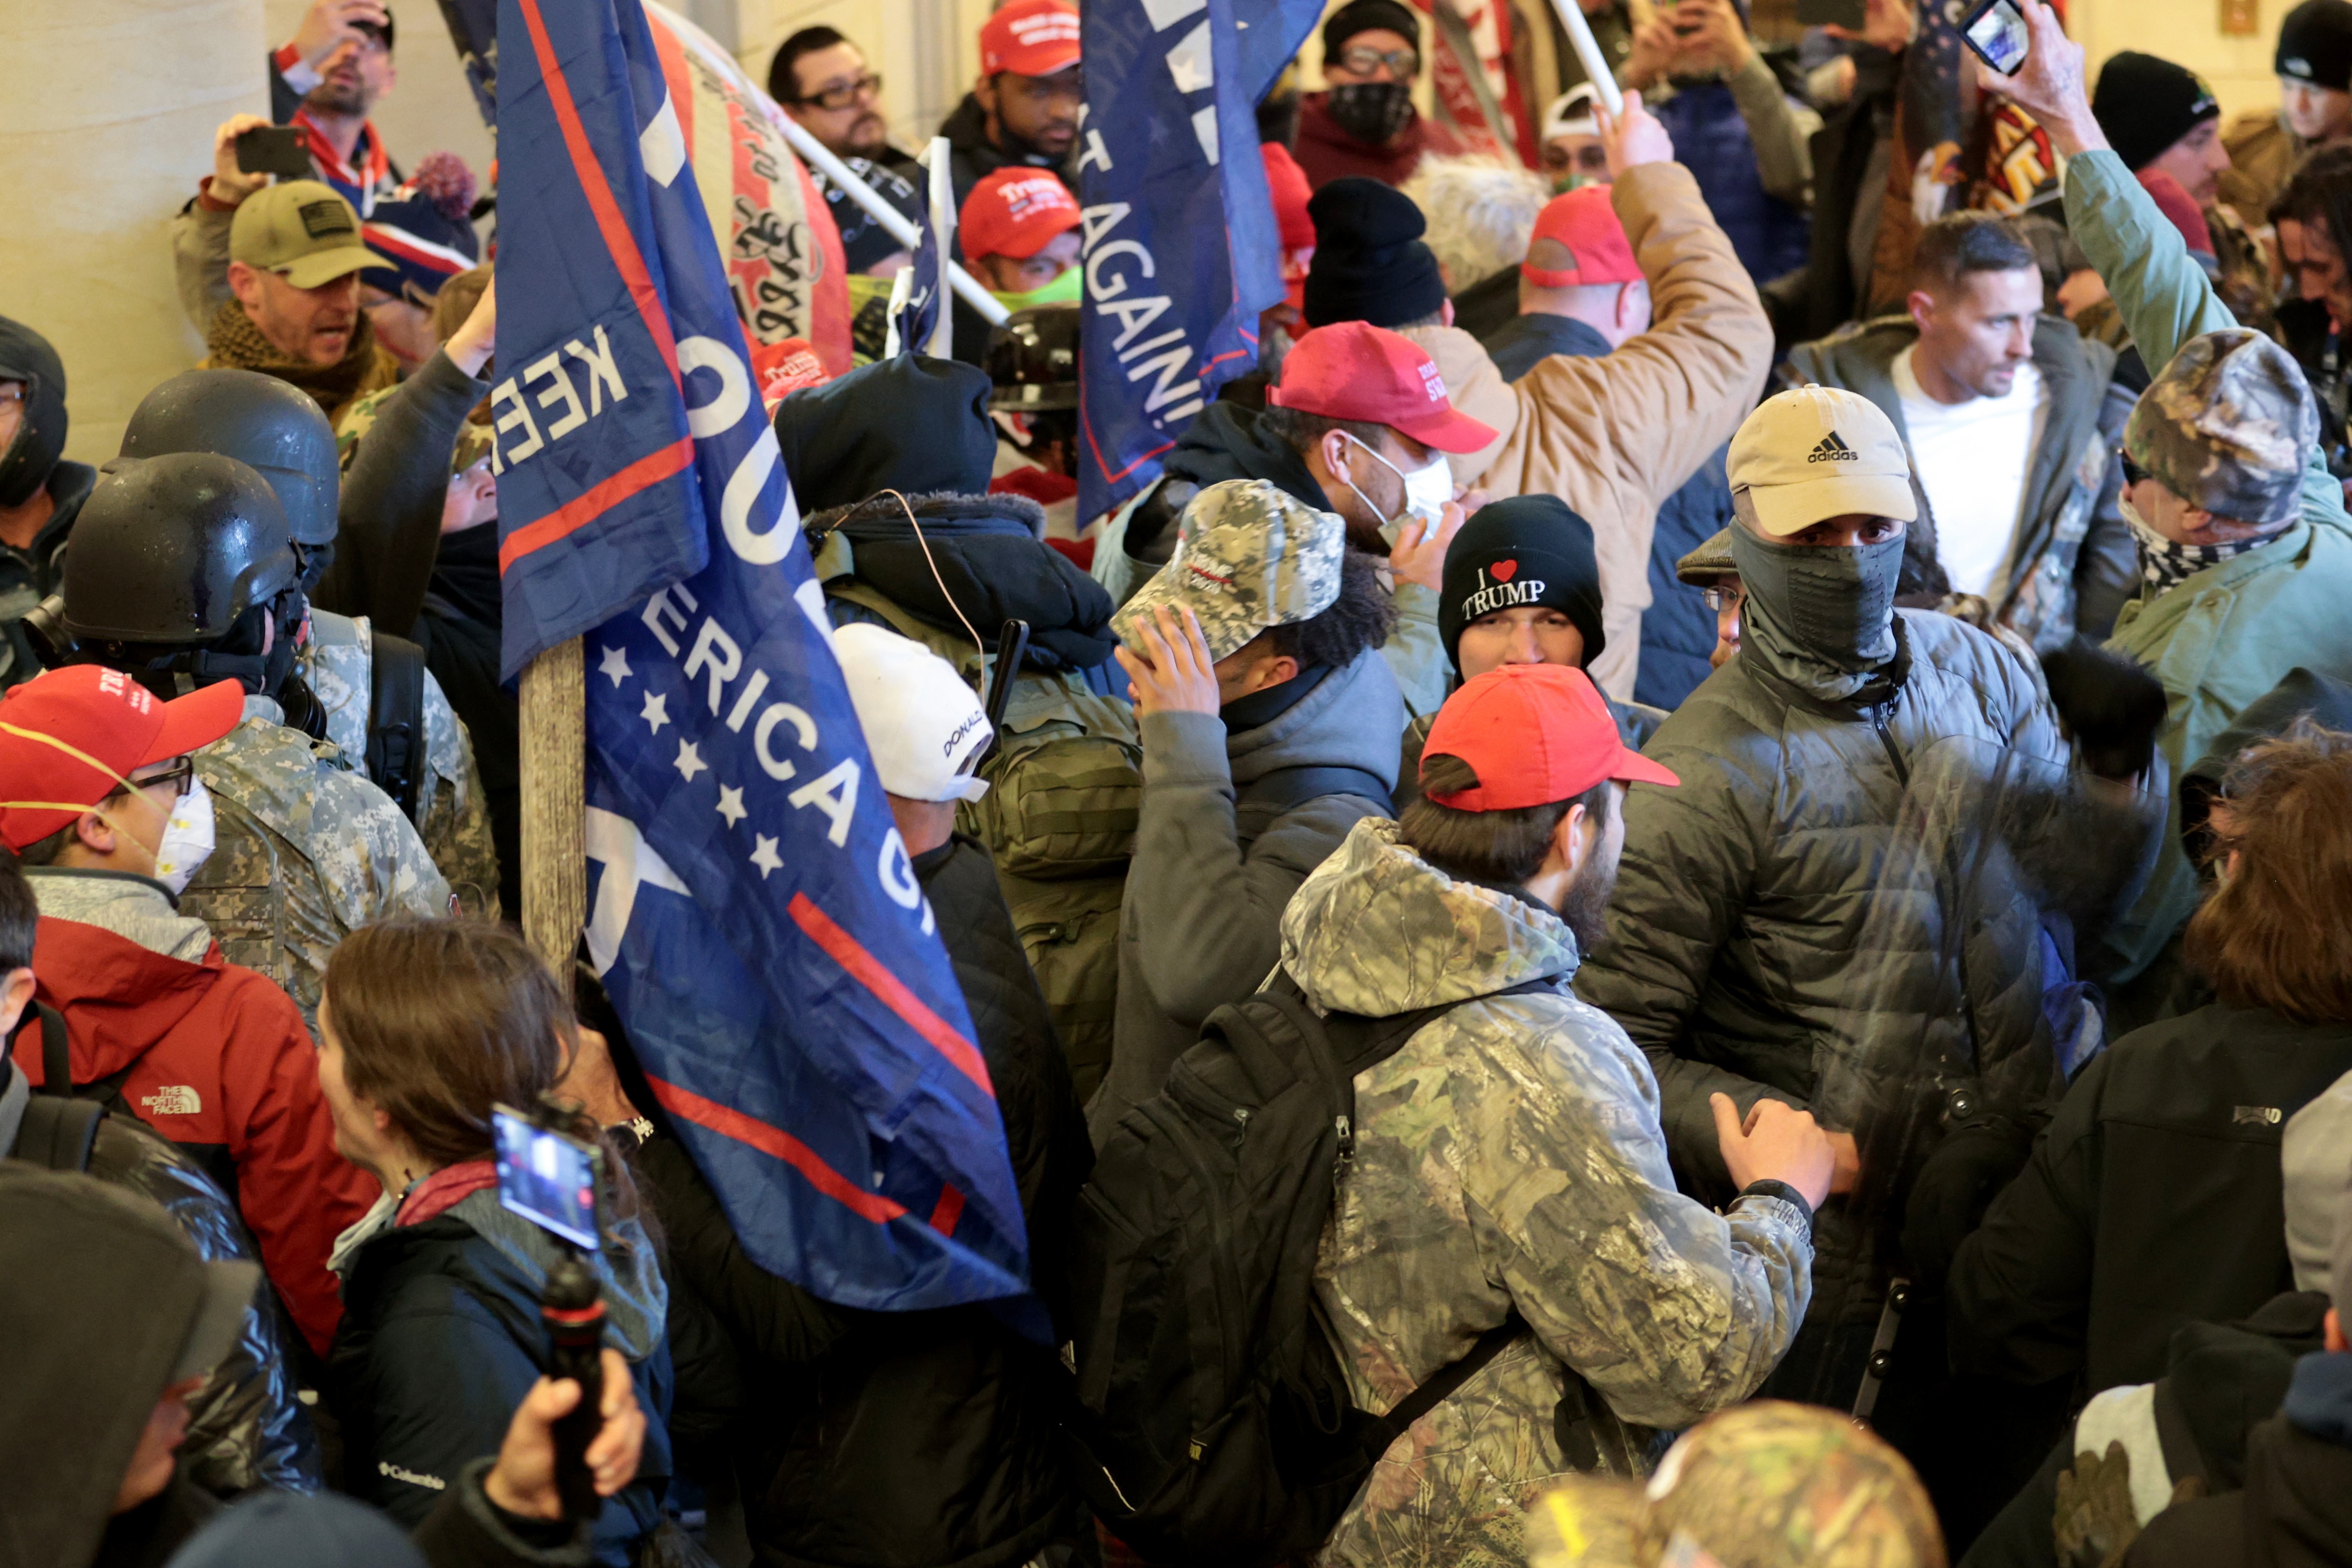 Protesters gather inside the US Capitol Building on 6 January, 2021 in Washington, DC.